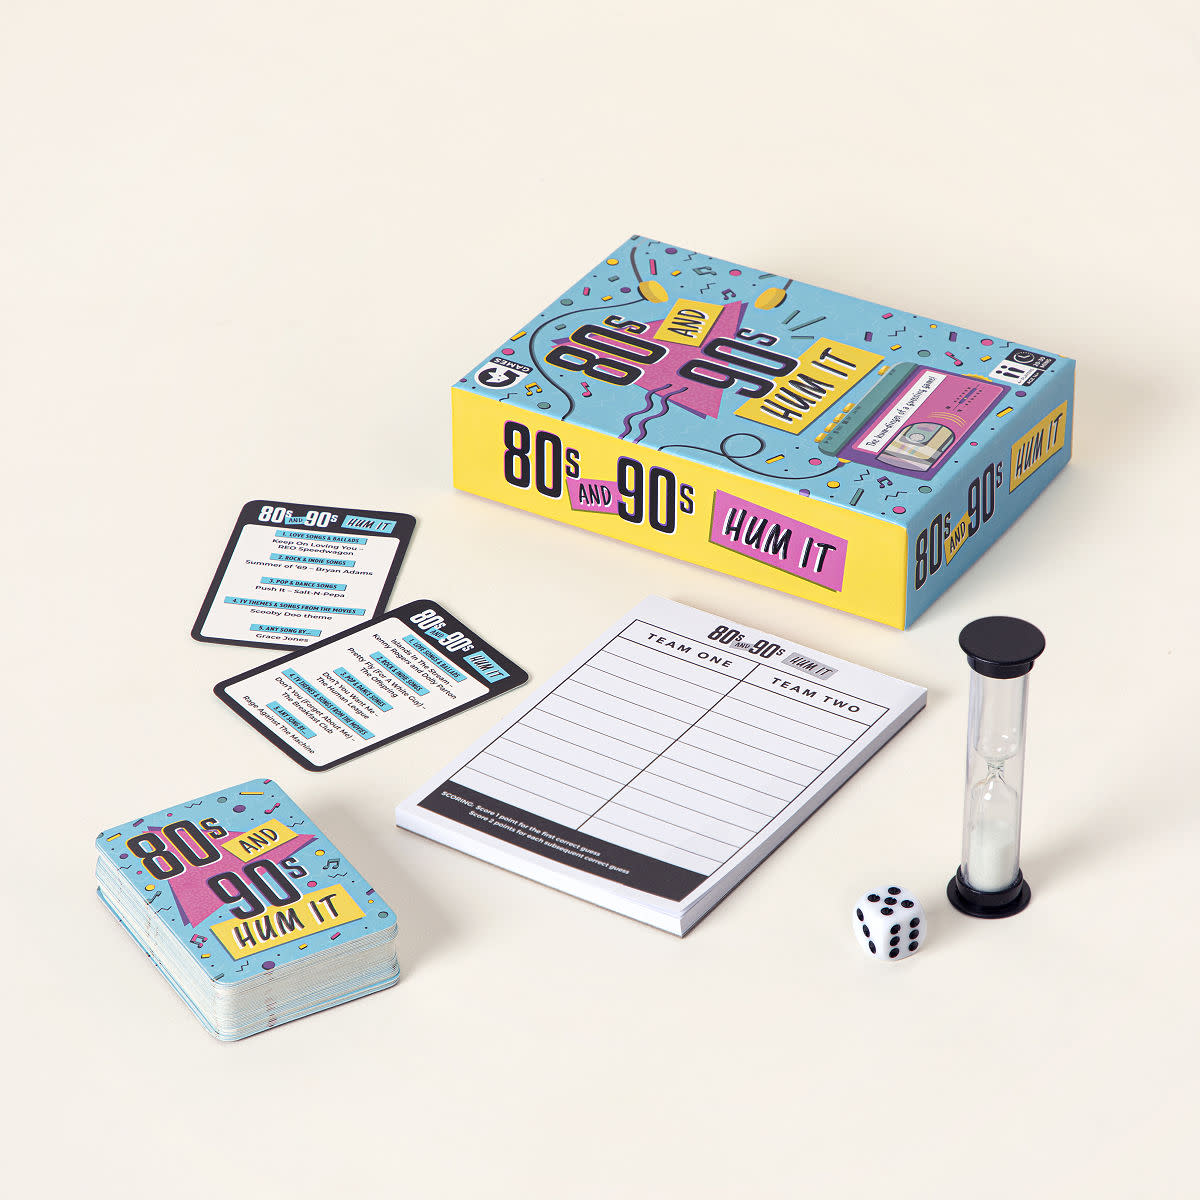 Uncommon Goods '80s and '90s Hum the Song Game (Uncommon Goods / Uncommon Goods)